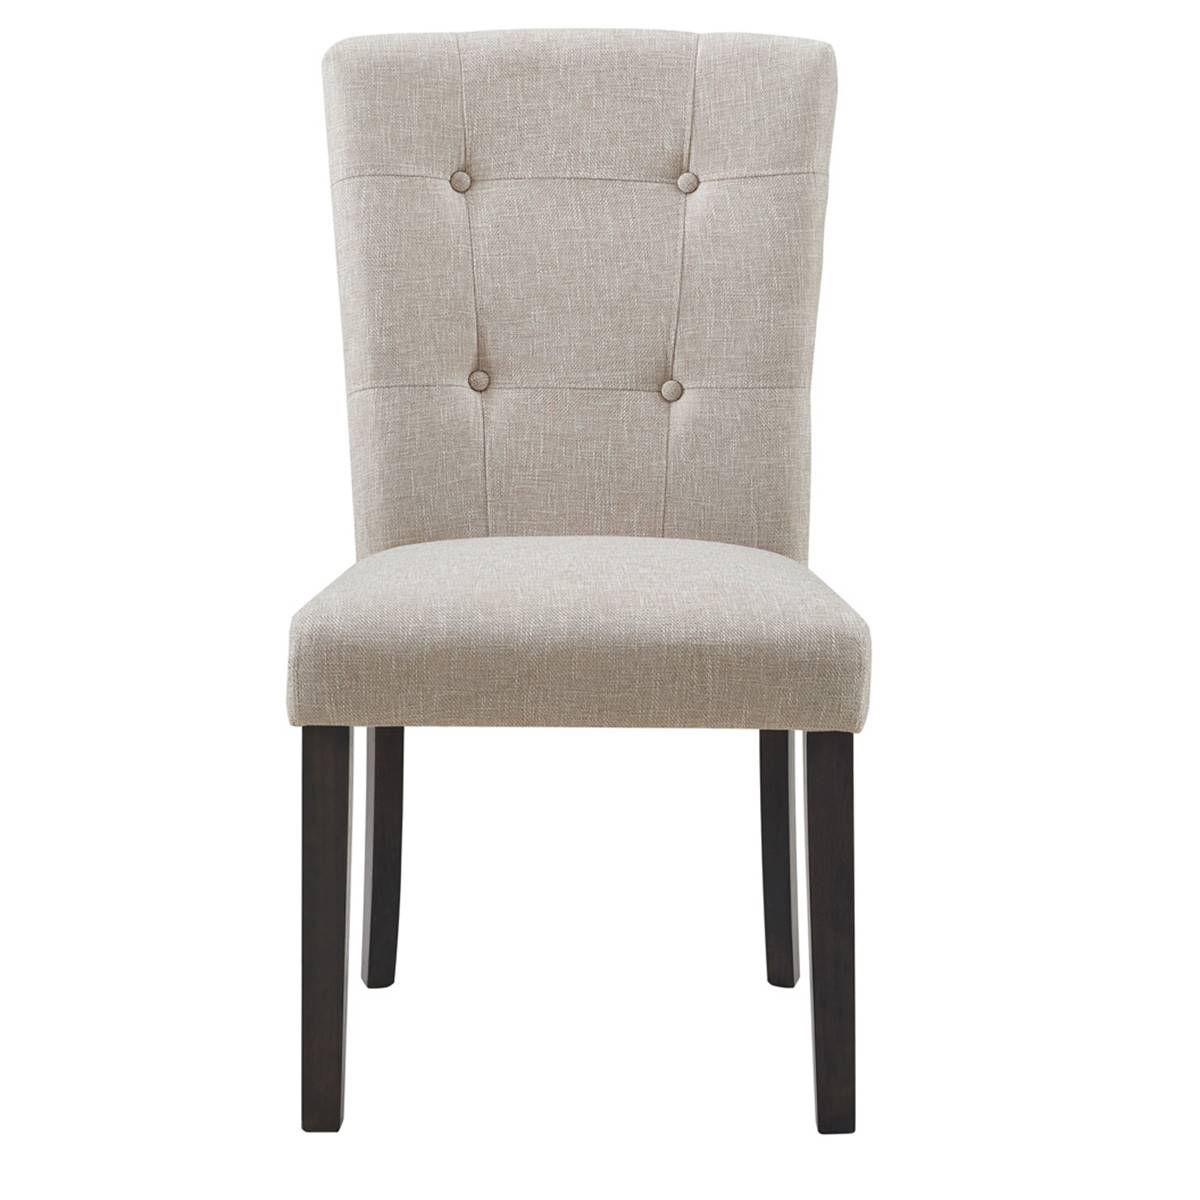 Elements Lexi Upholstered Chair Set